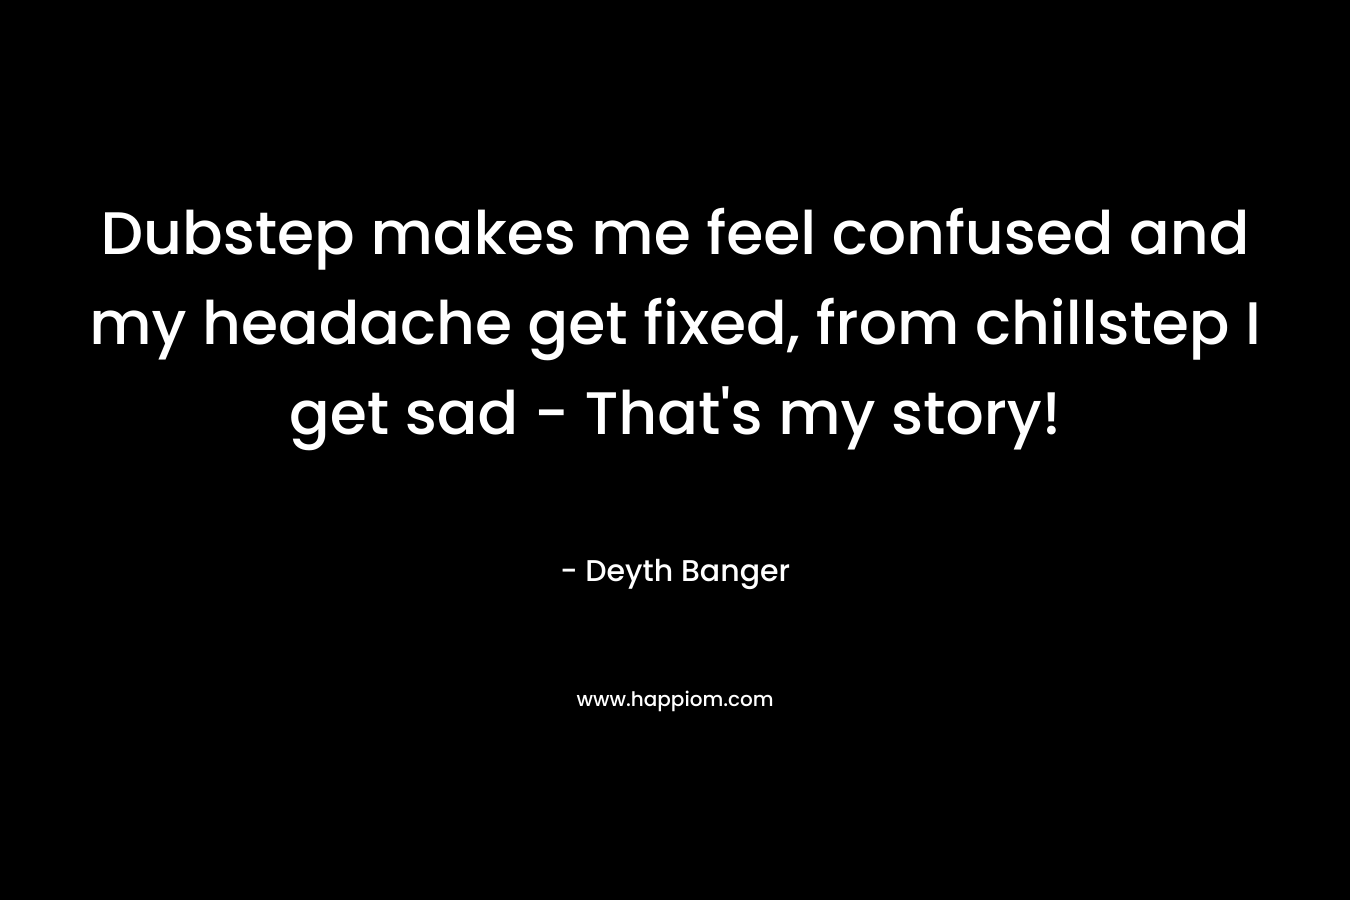 Dubstep makes me feel confused and my headache get fixed, from chillstep I get sad – That’s my story! – Deyth Banger